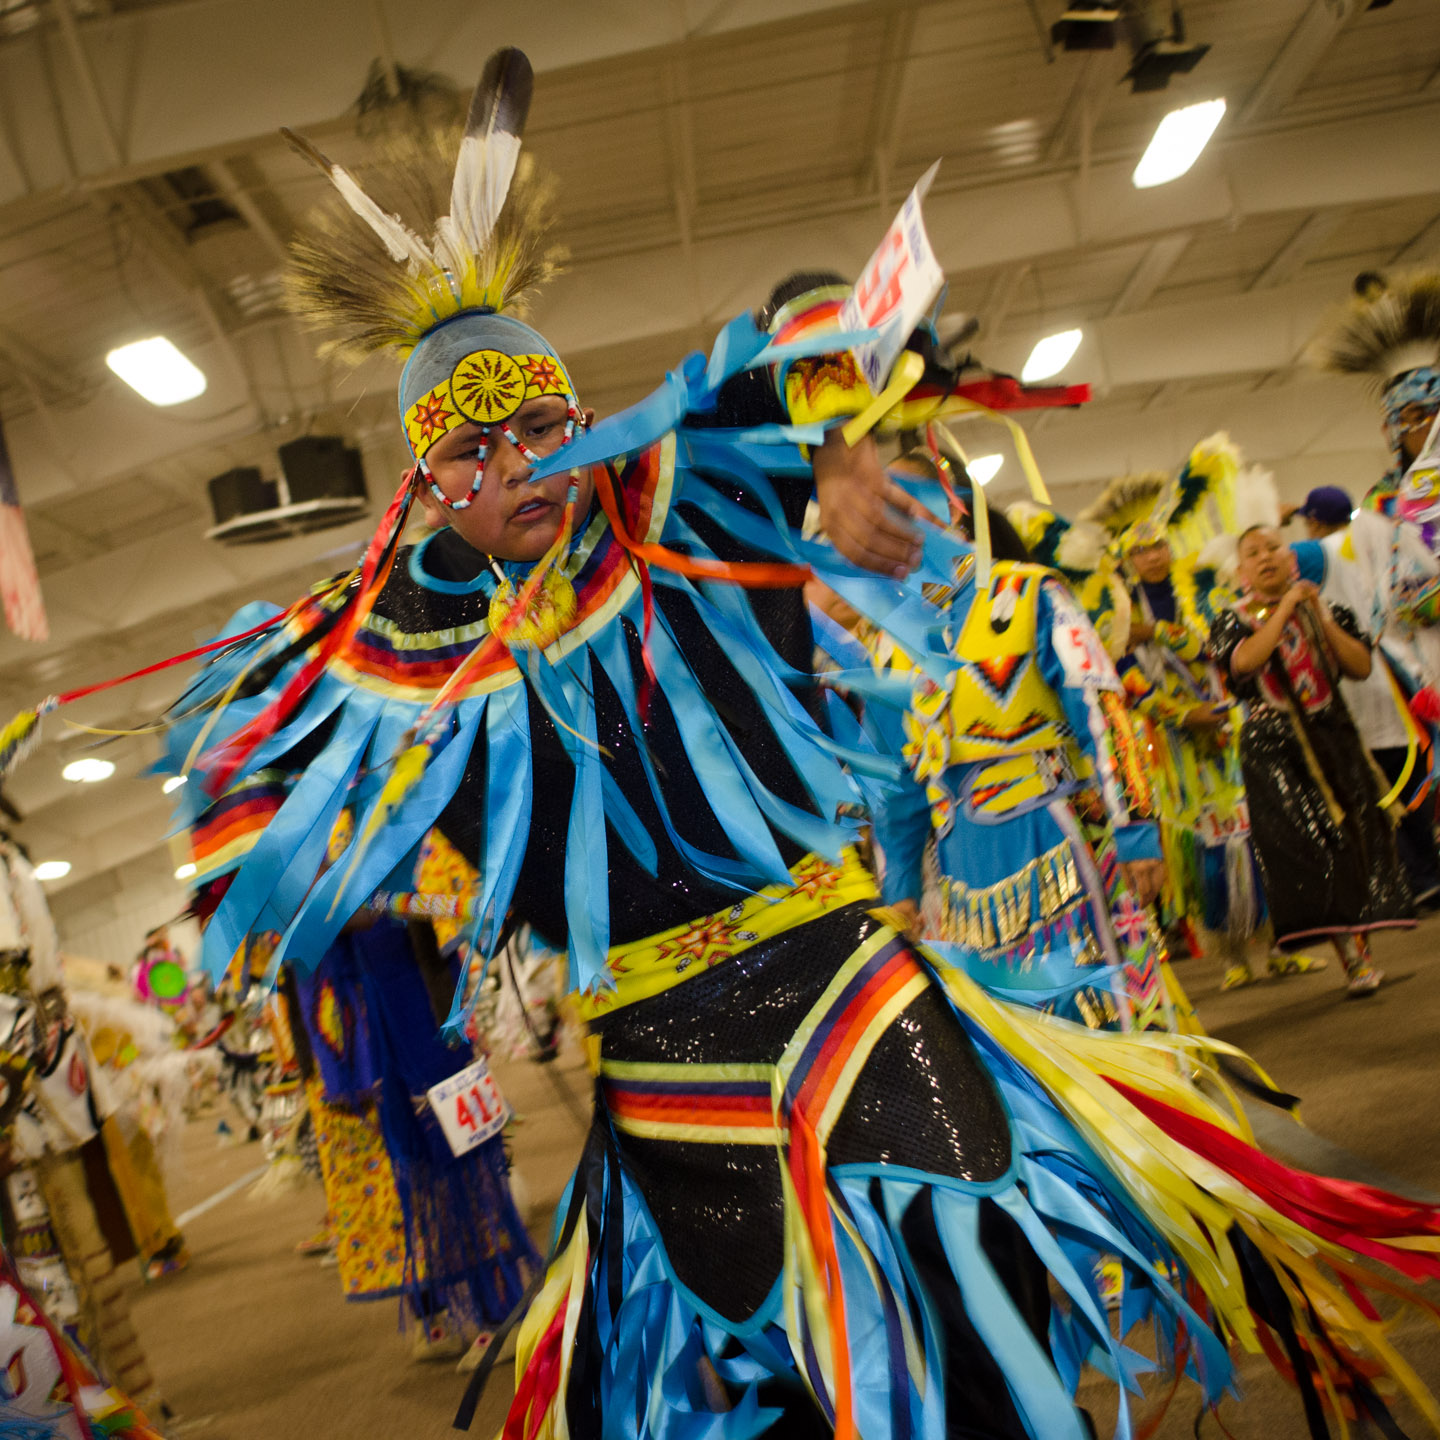 A young dancer gives an energetic display as he makes his way into the powwow arena.